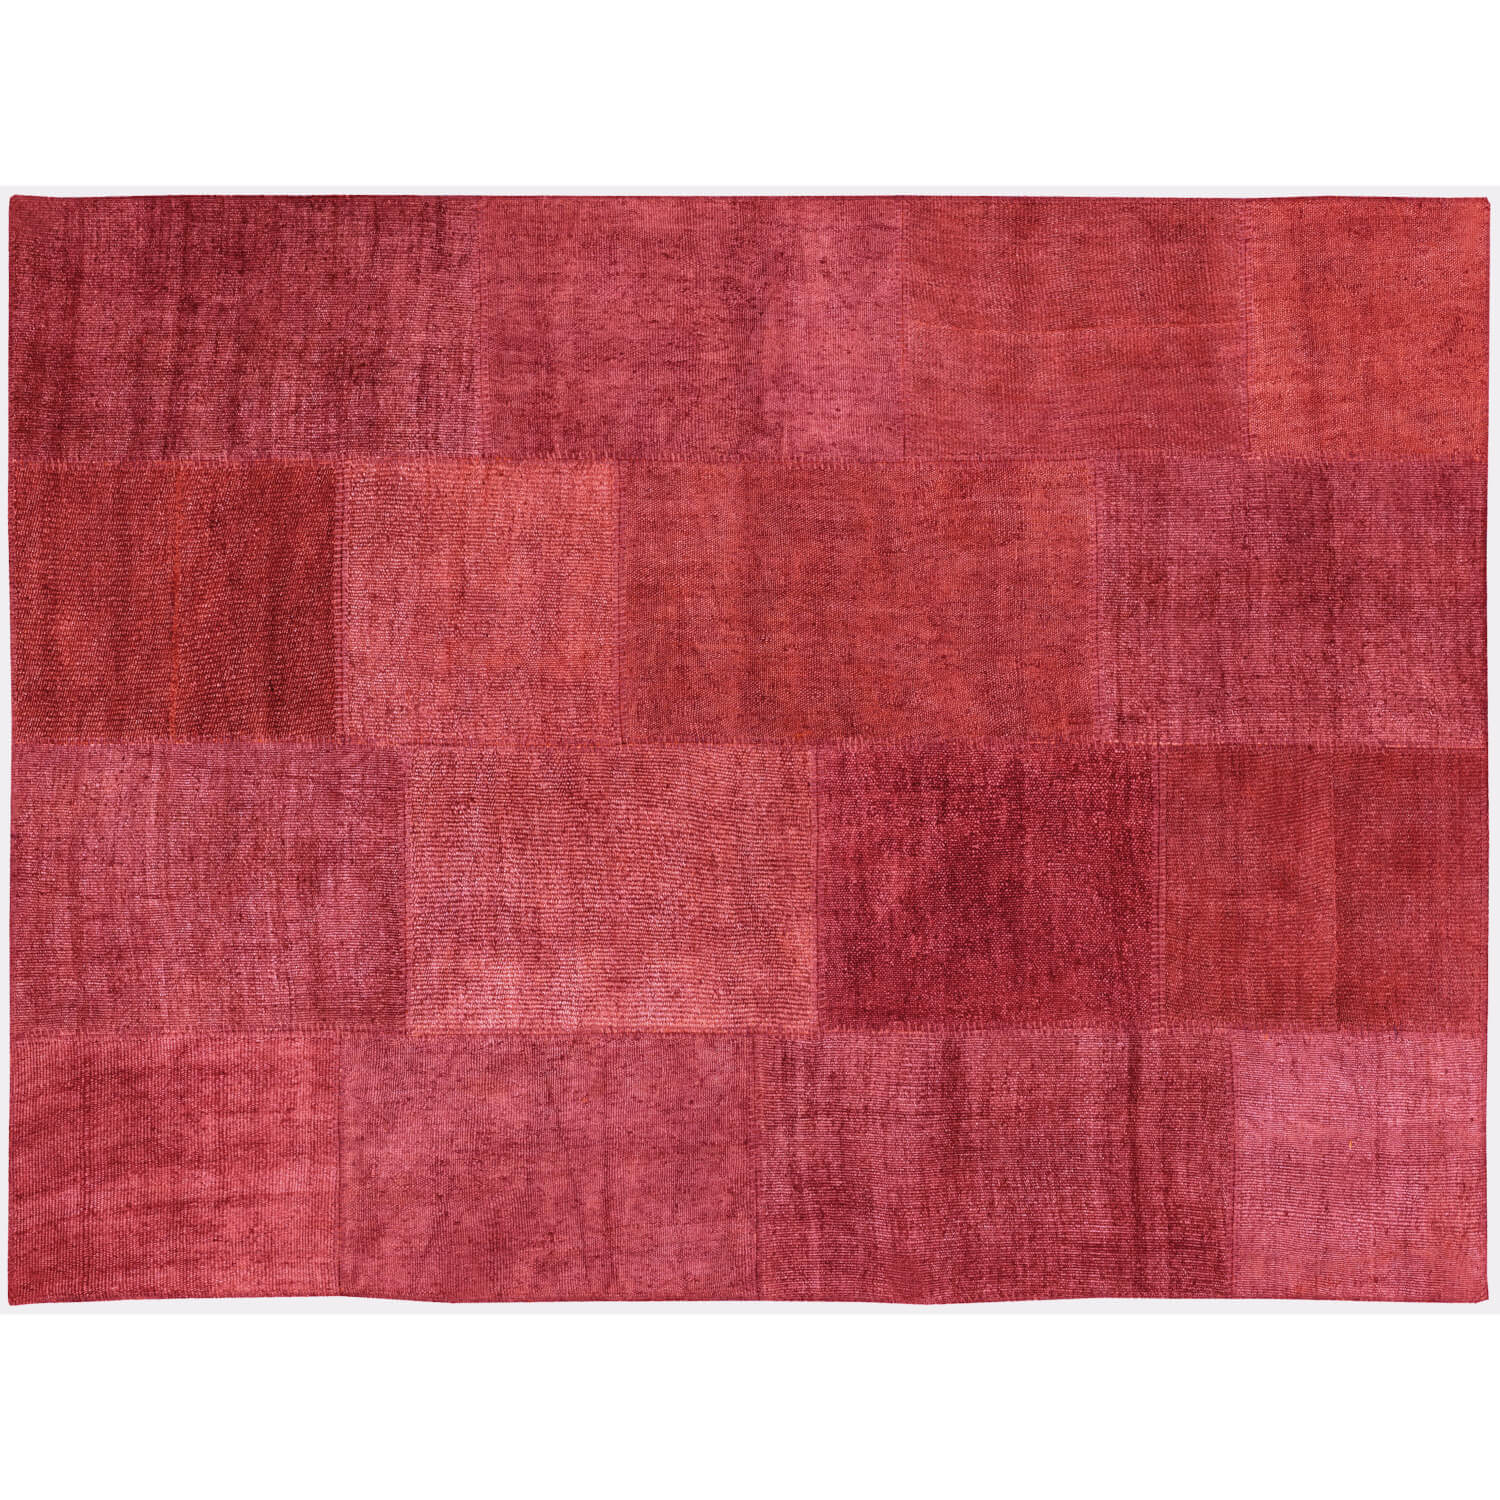 *TAPPETO AMBIENTE 140X200 ROSSO 01